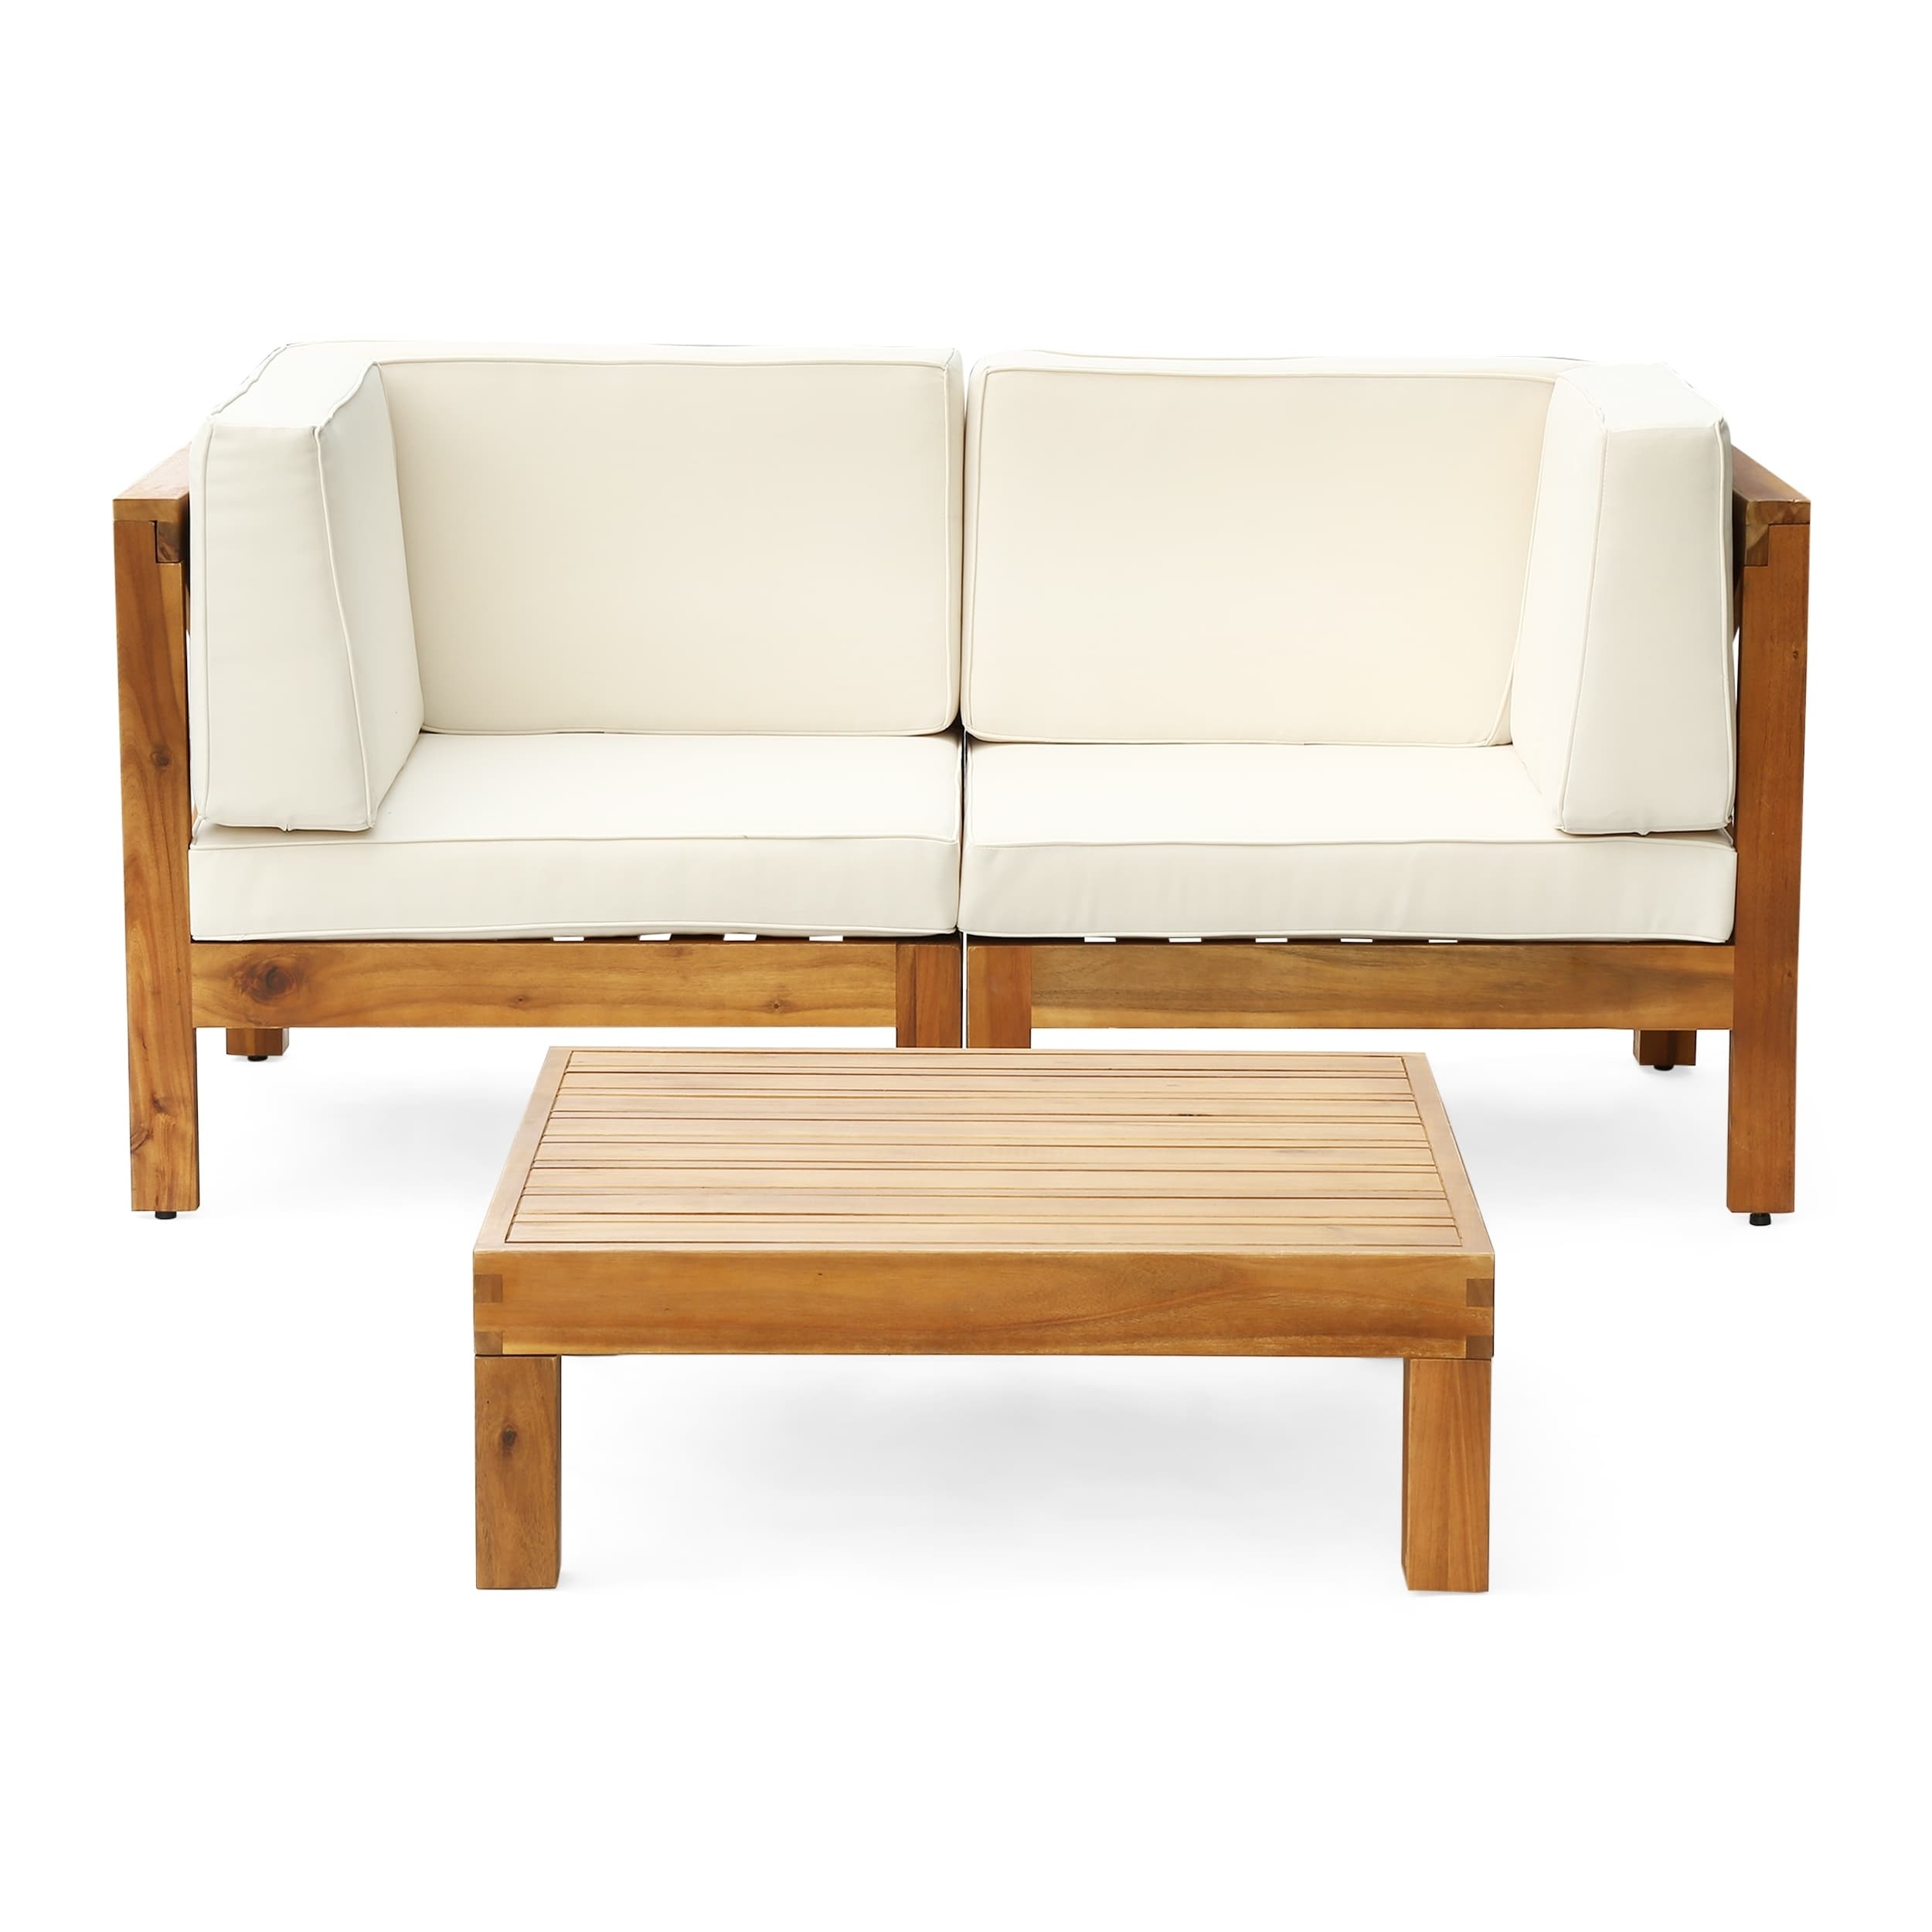 Brava Outdoor 2 Seater Sectional Acacia Wood Loveseat Set With Coffee Table And Cushions By Christopher Knight Home